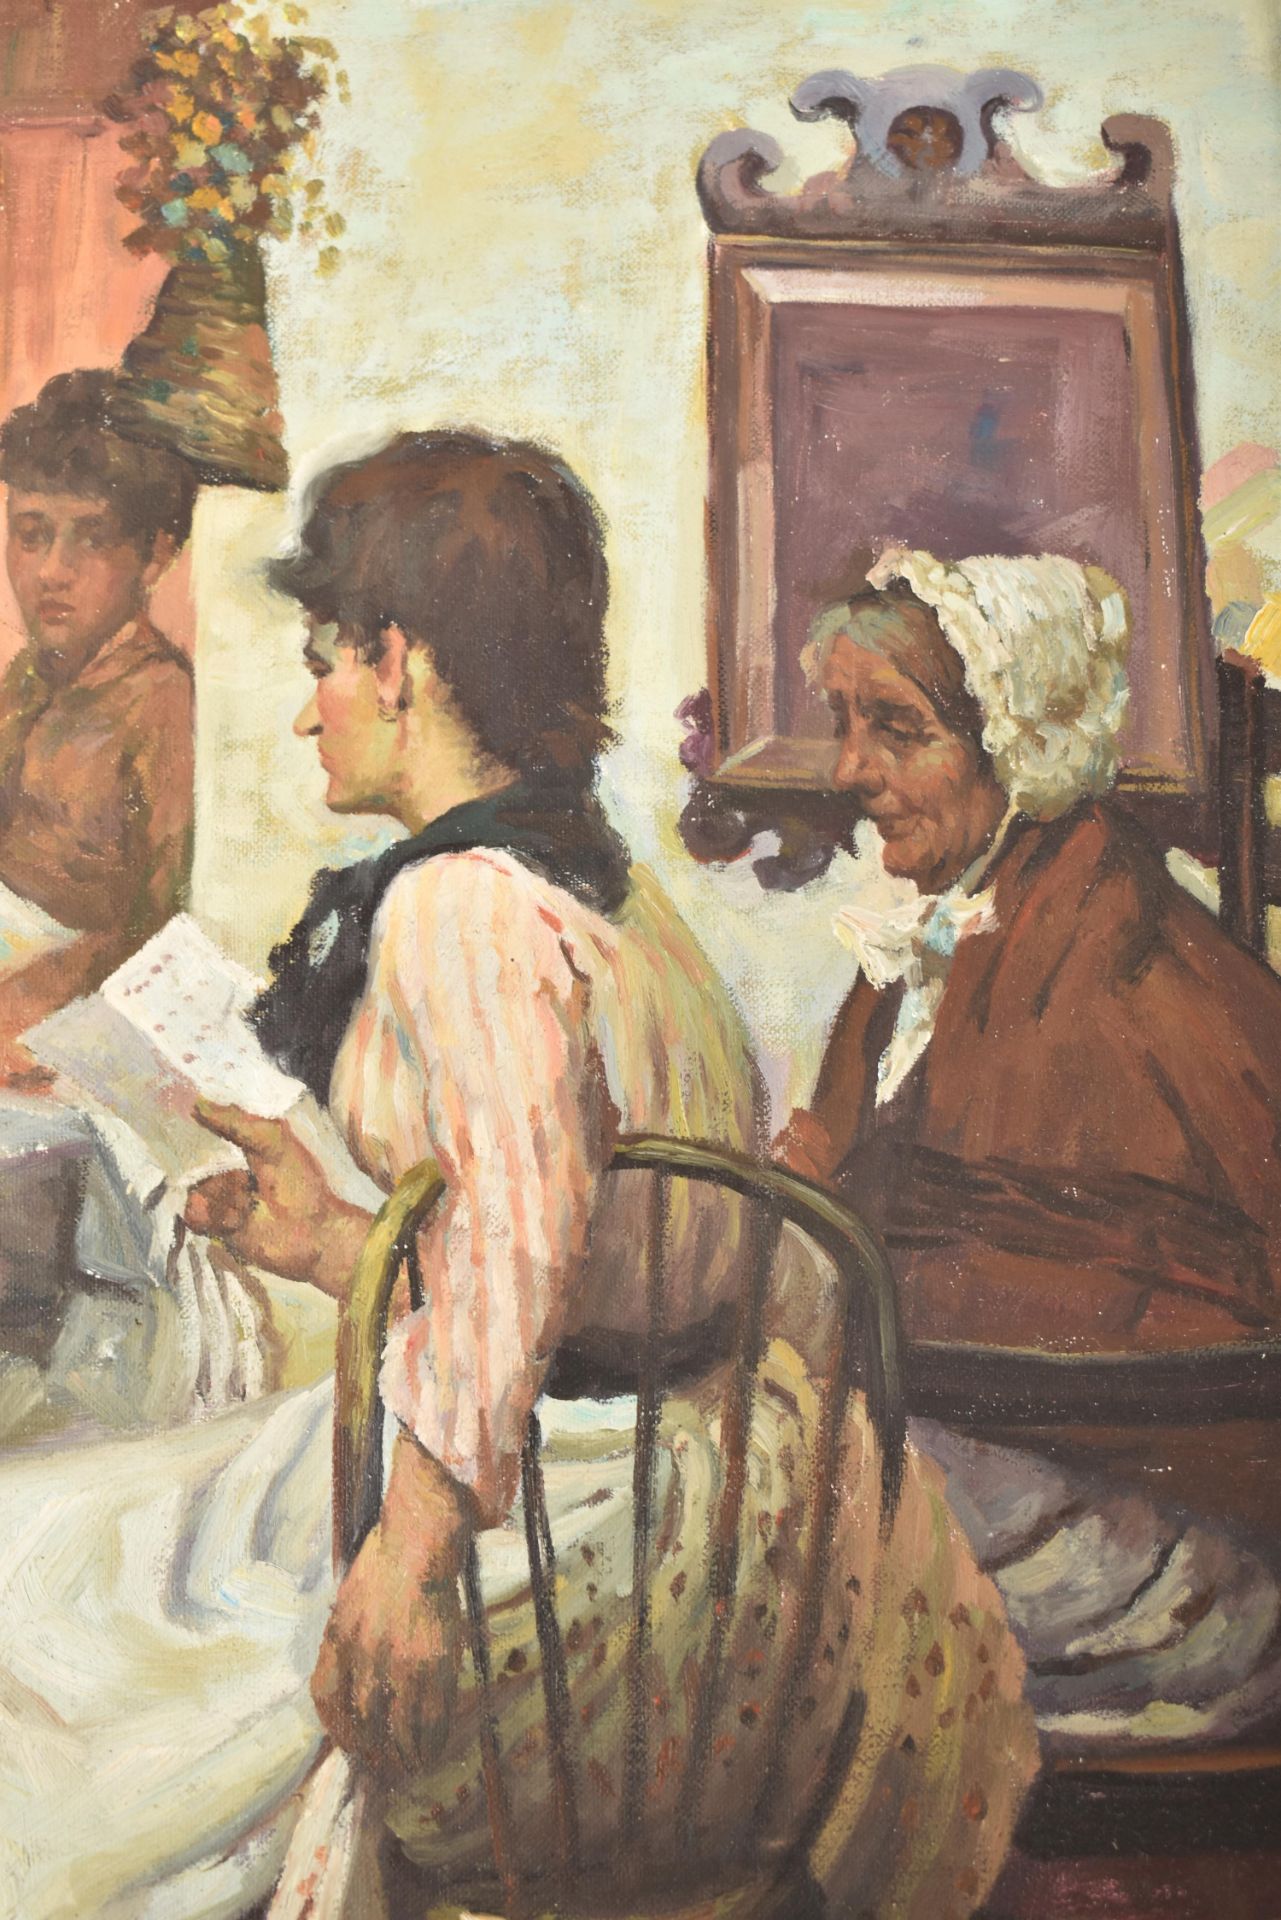 CONTINENTAL MID 20TH CENTURY OIL PAINTING OF FIVE WOMEN - Image 3 of 5